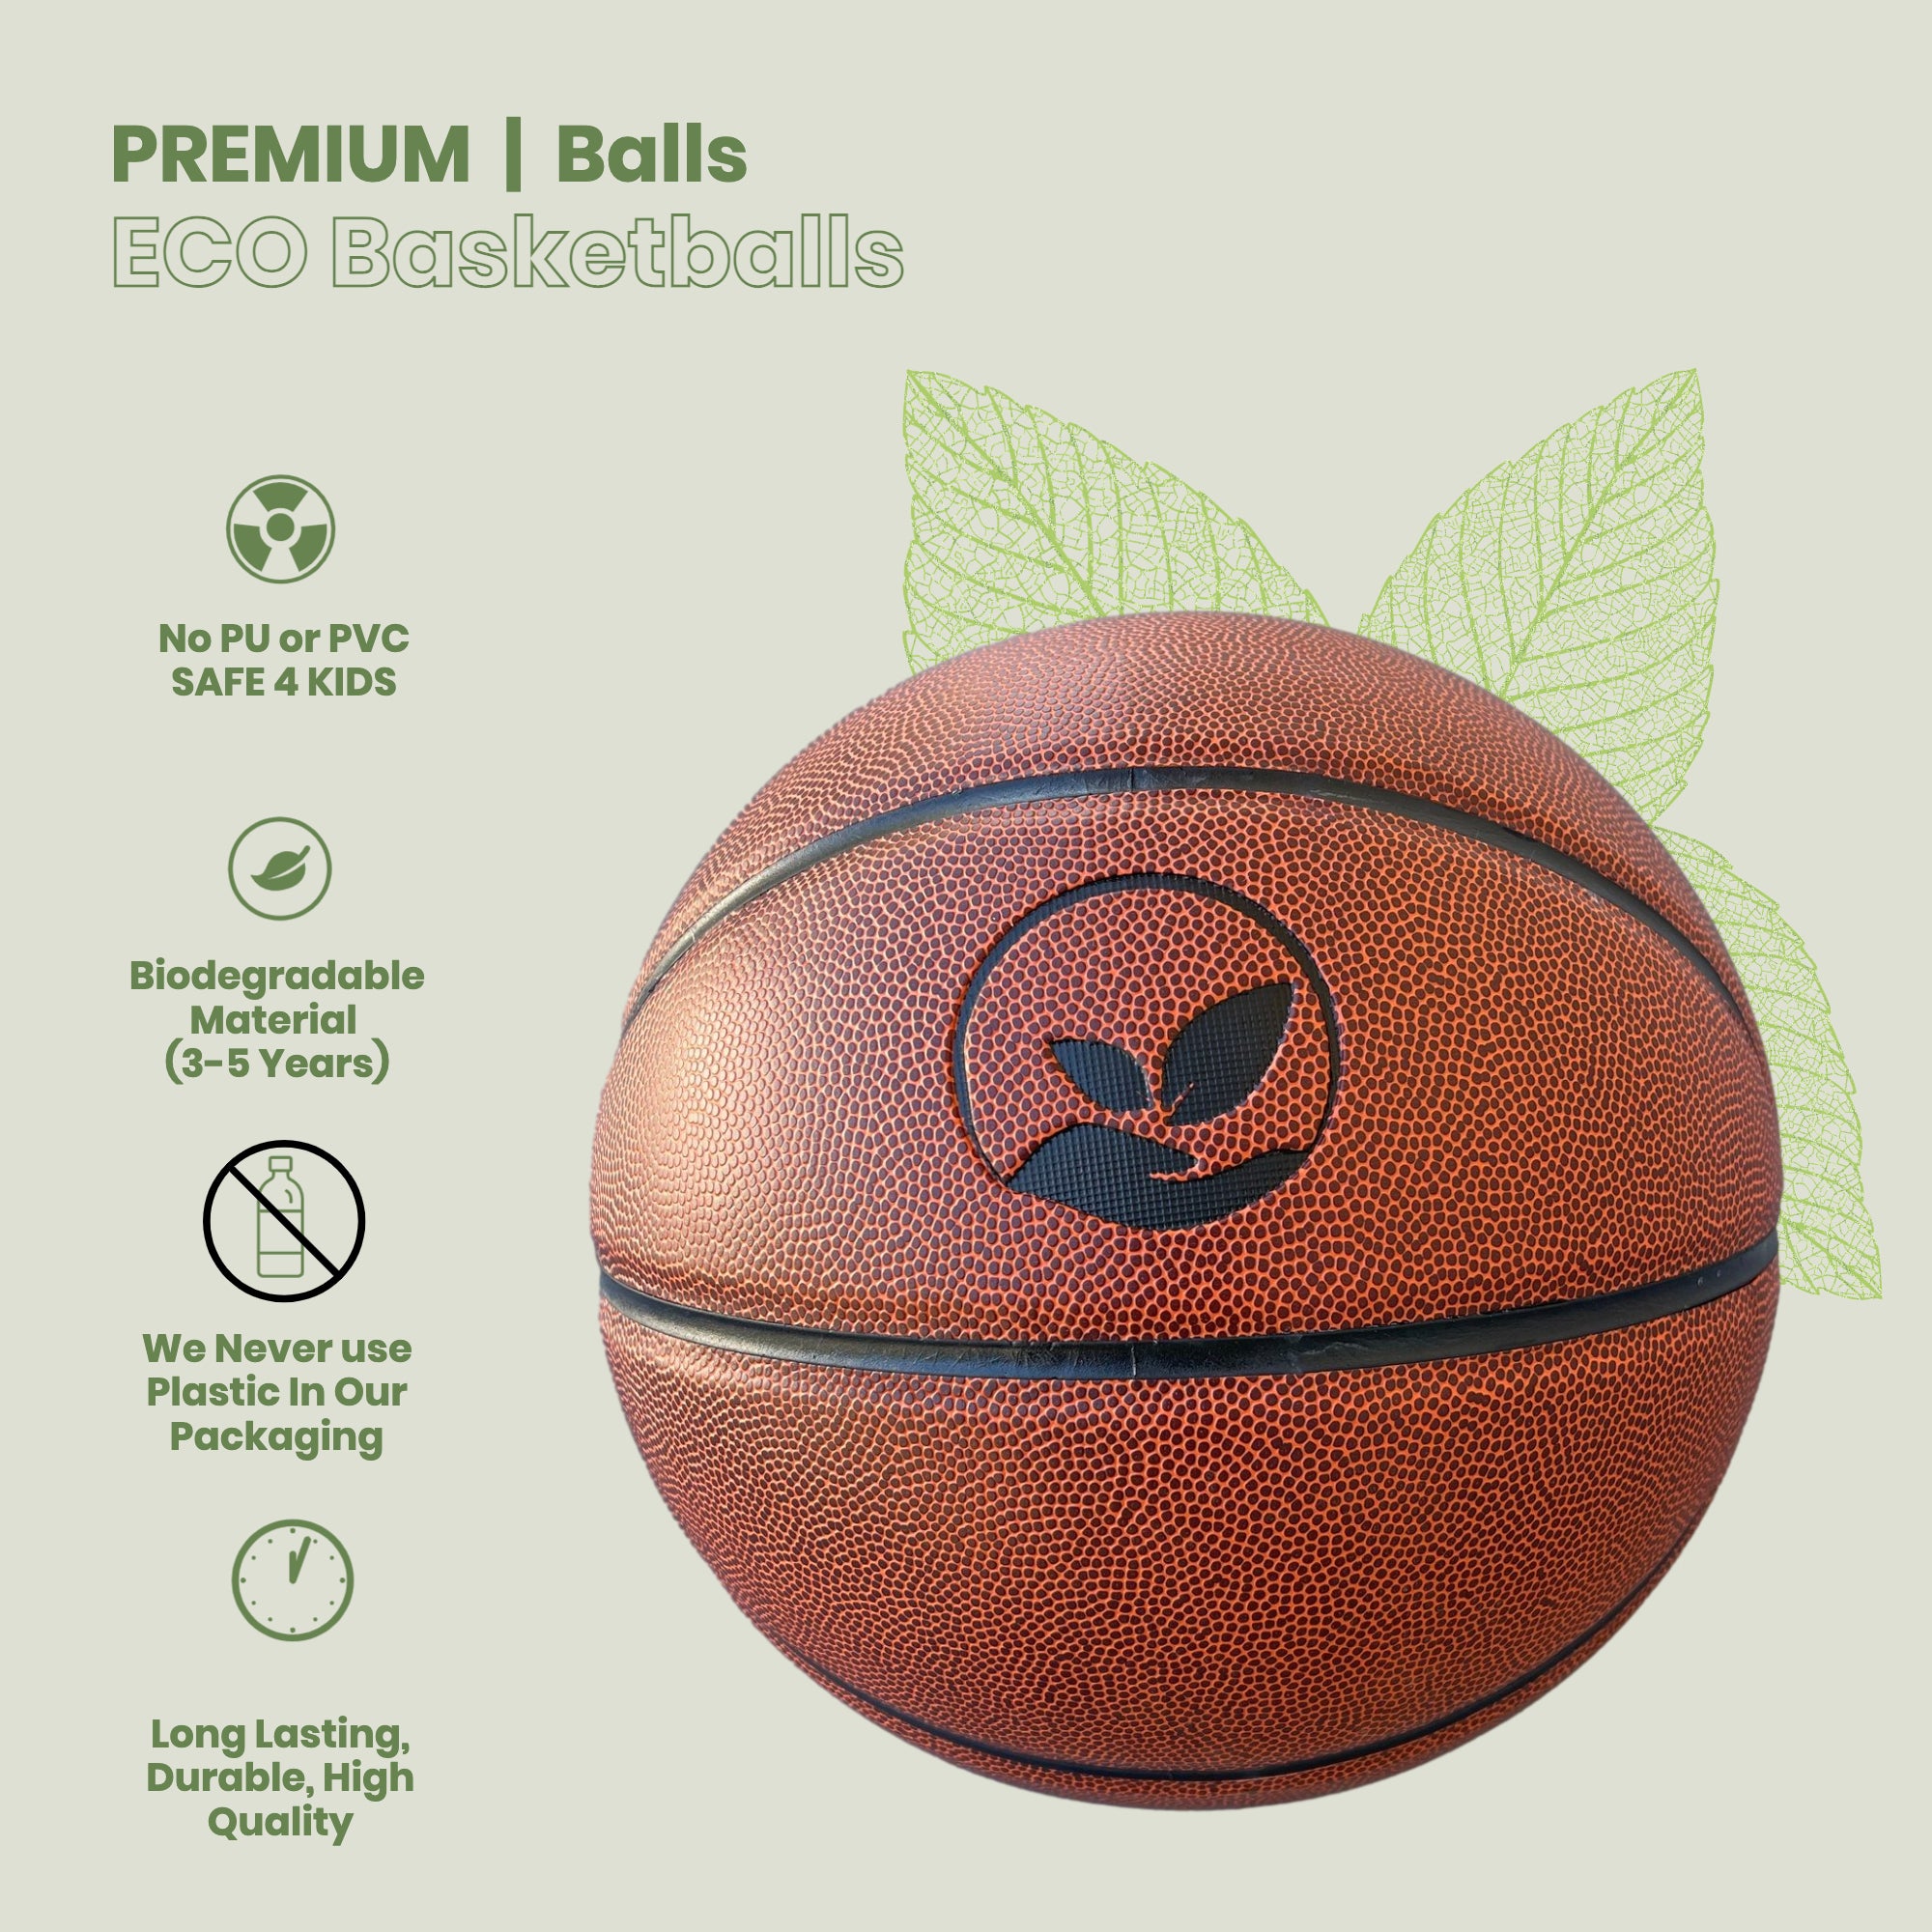 Vegan Leather Youth Basketball 27.5" - Junior Basketballs for Kids - Cruelty-Free